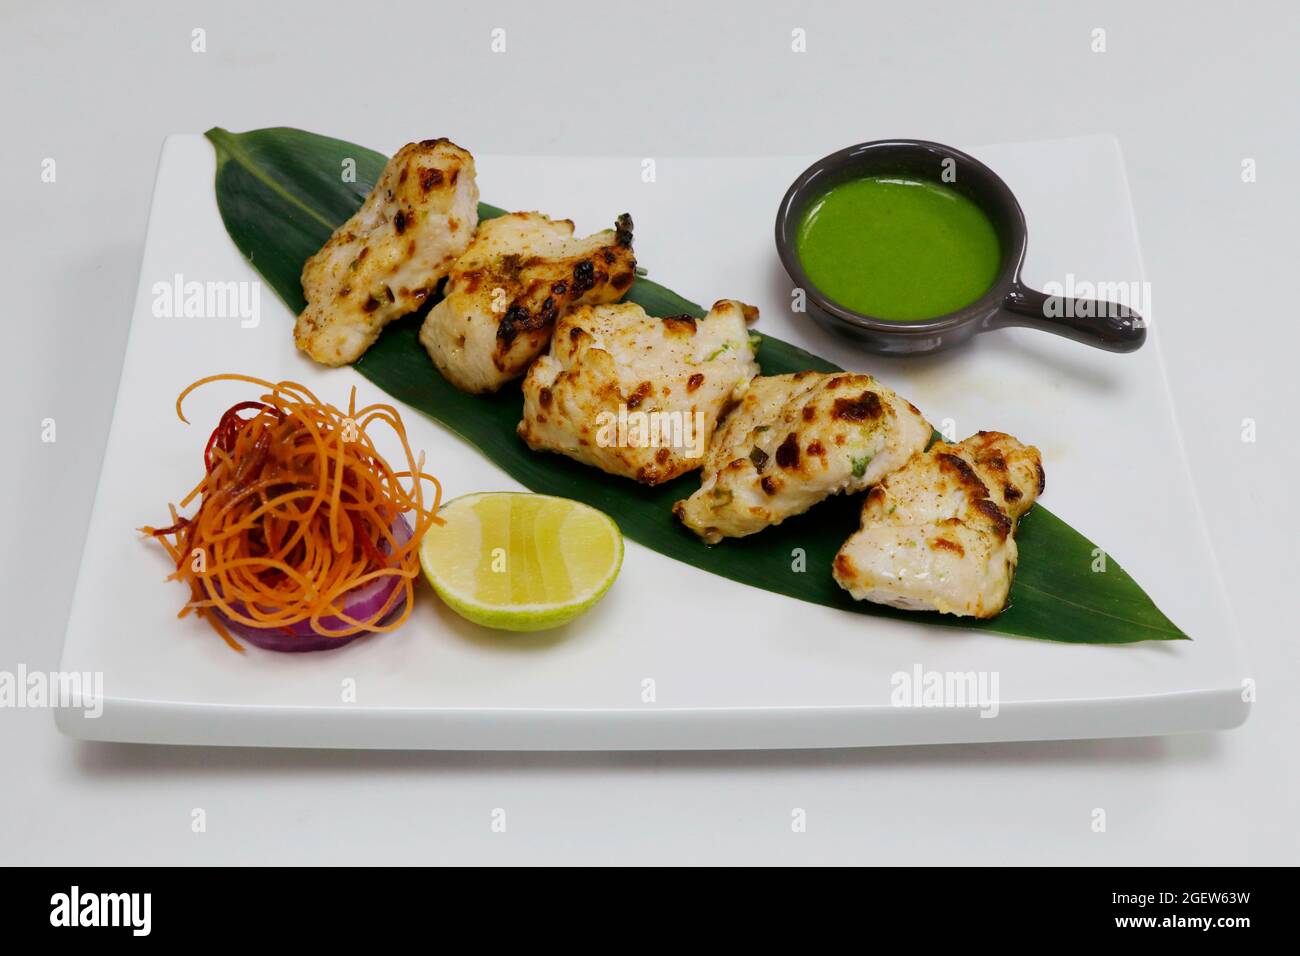 indian food speciality tandoori malai chicken tikka, cream based marinated chicken cubes cooked in clay oven Stock Photo